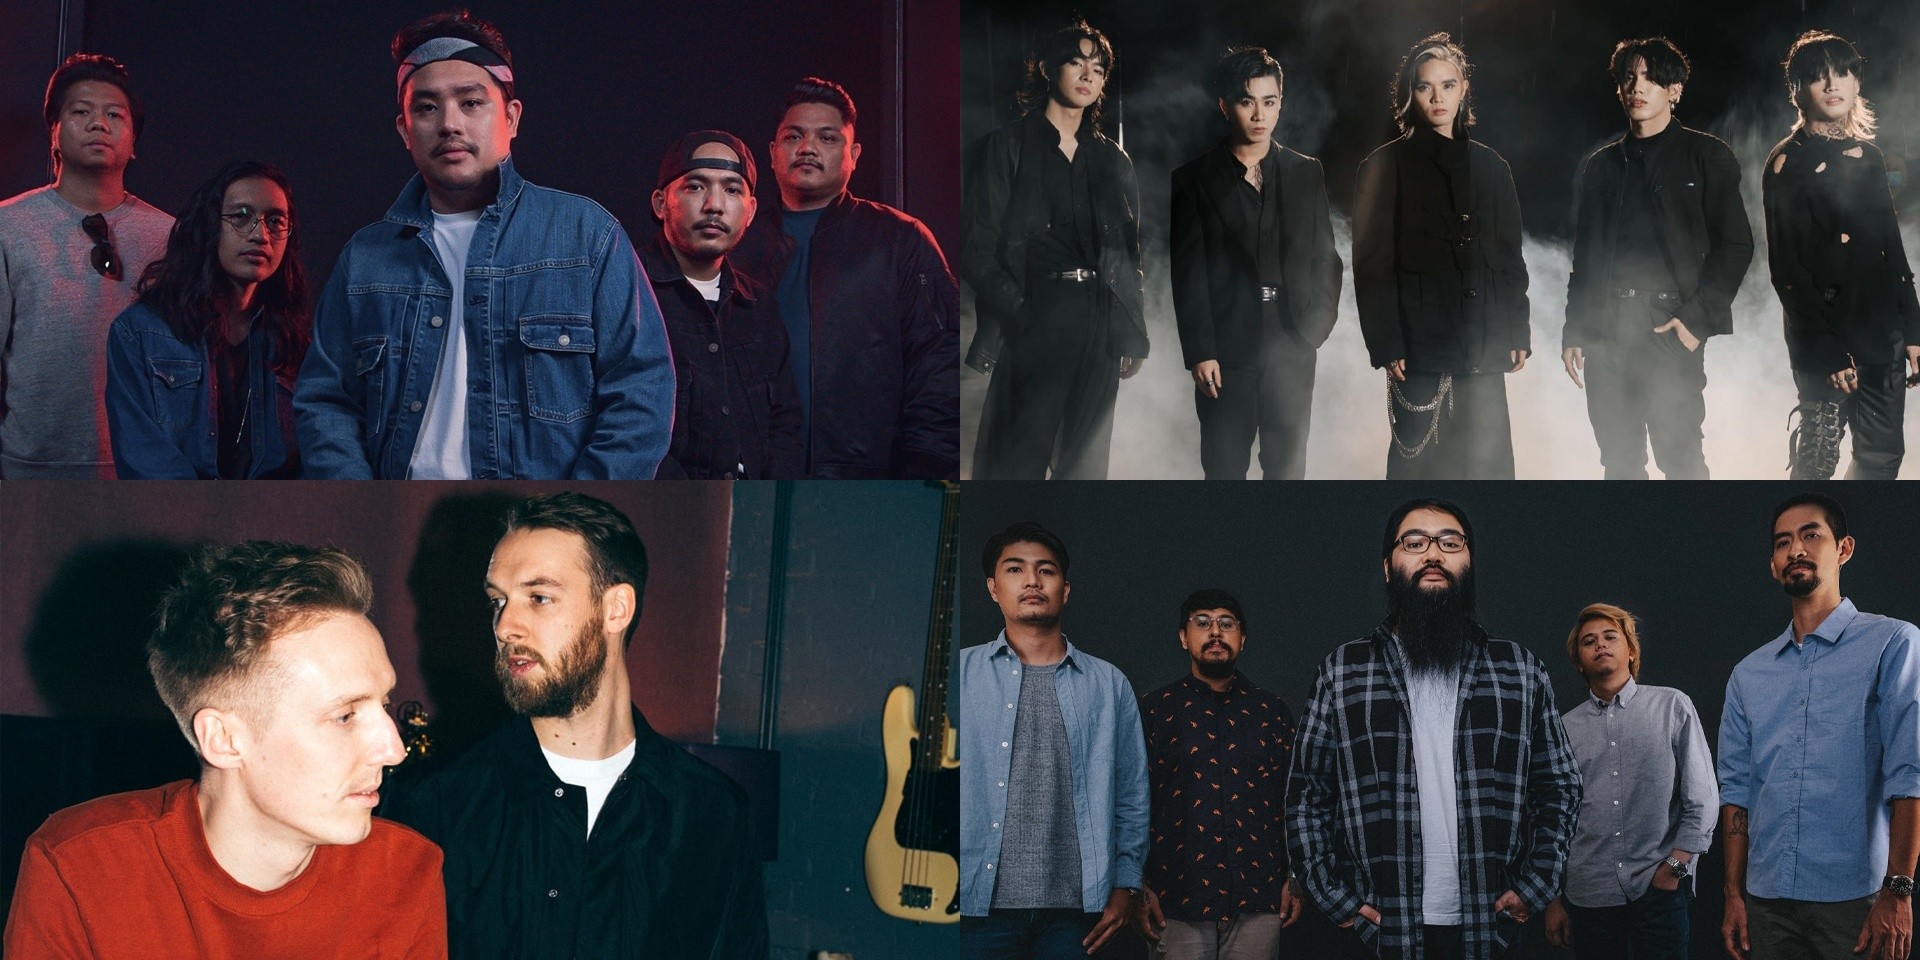 HONNE, SB19, December Avenue, I Belong to the Zoo, and more to perform at G Music Fest this weekend